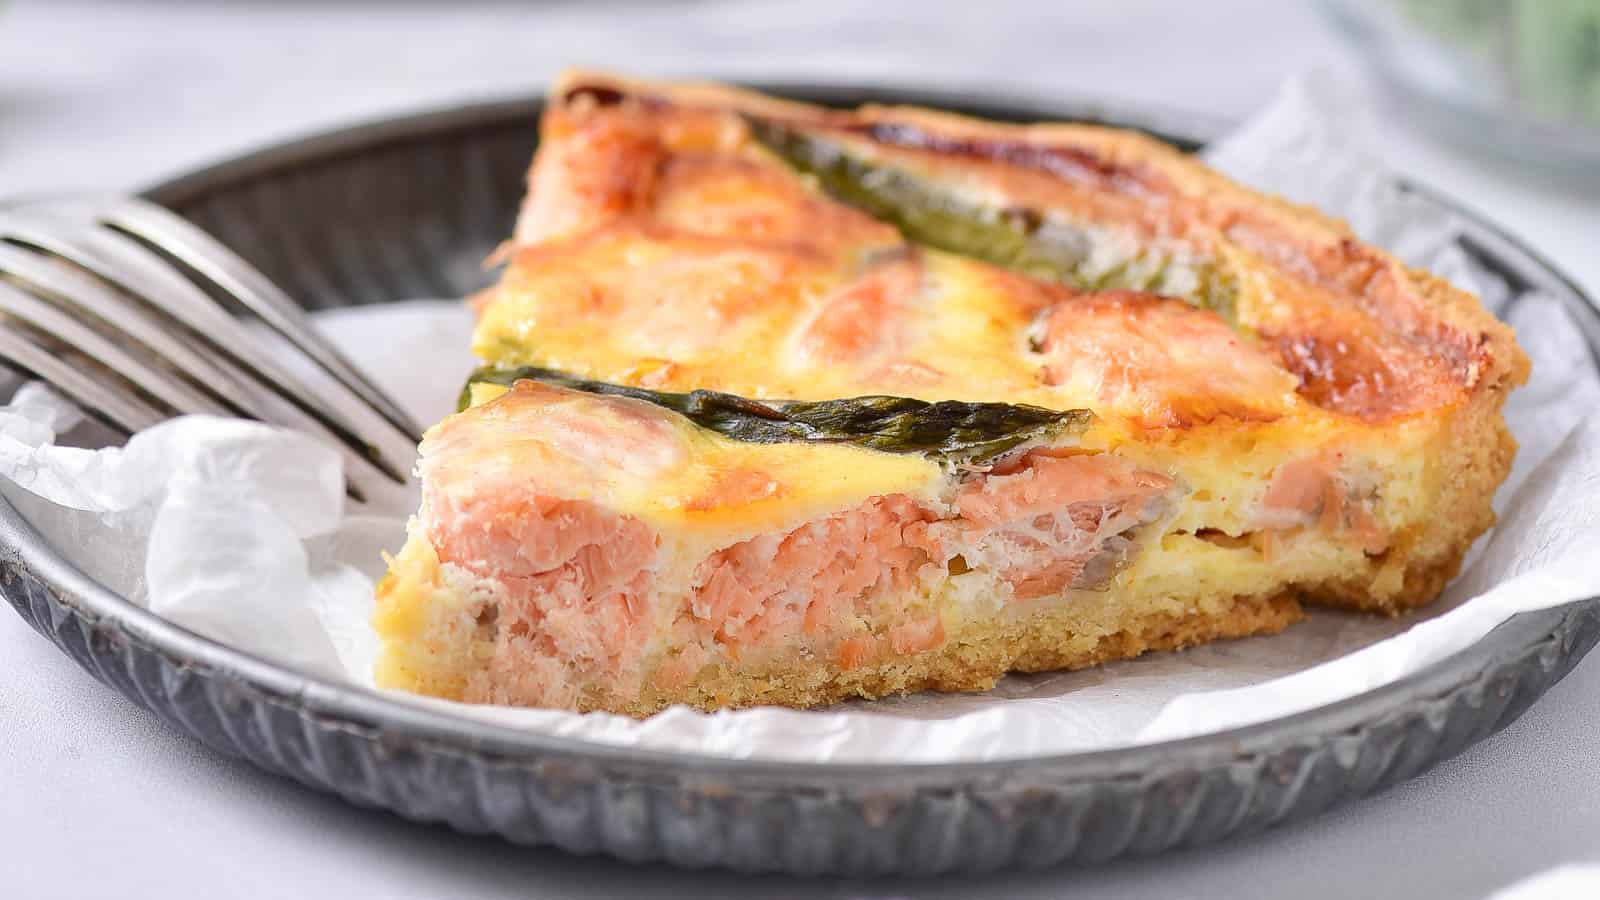 Salmon and asparagus quiche on a metal plate with parchment paper.